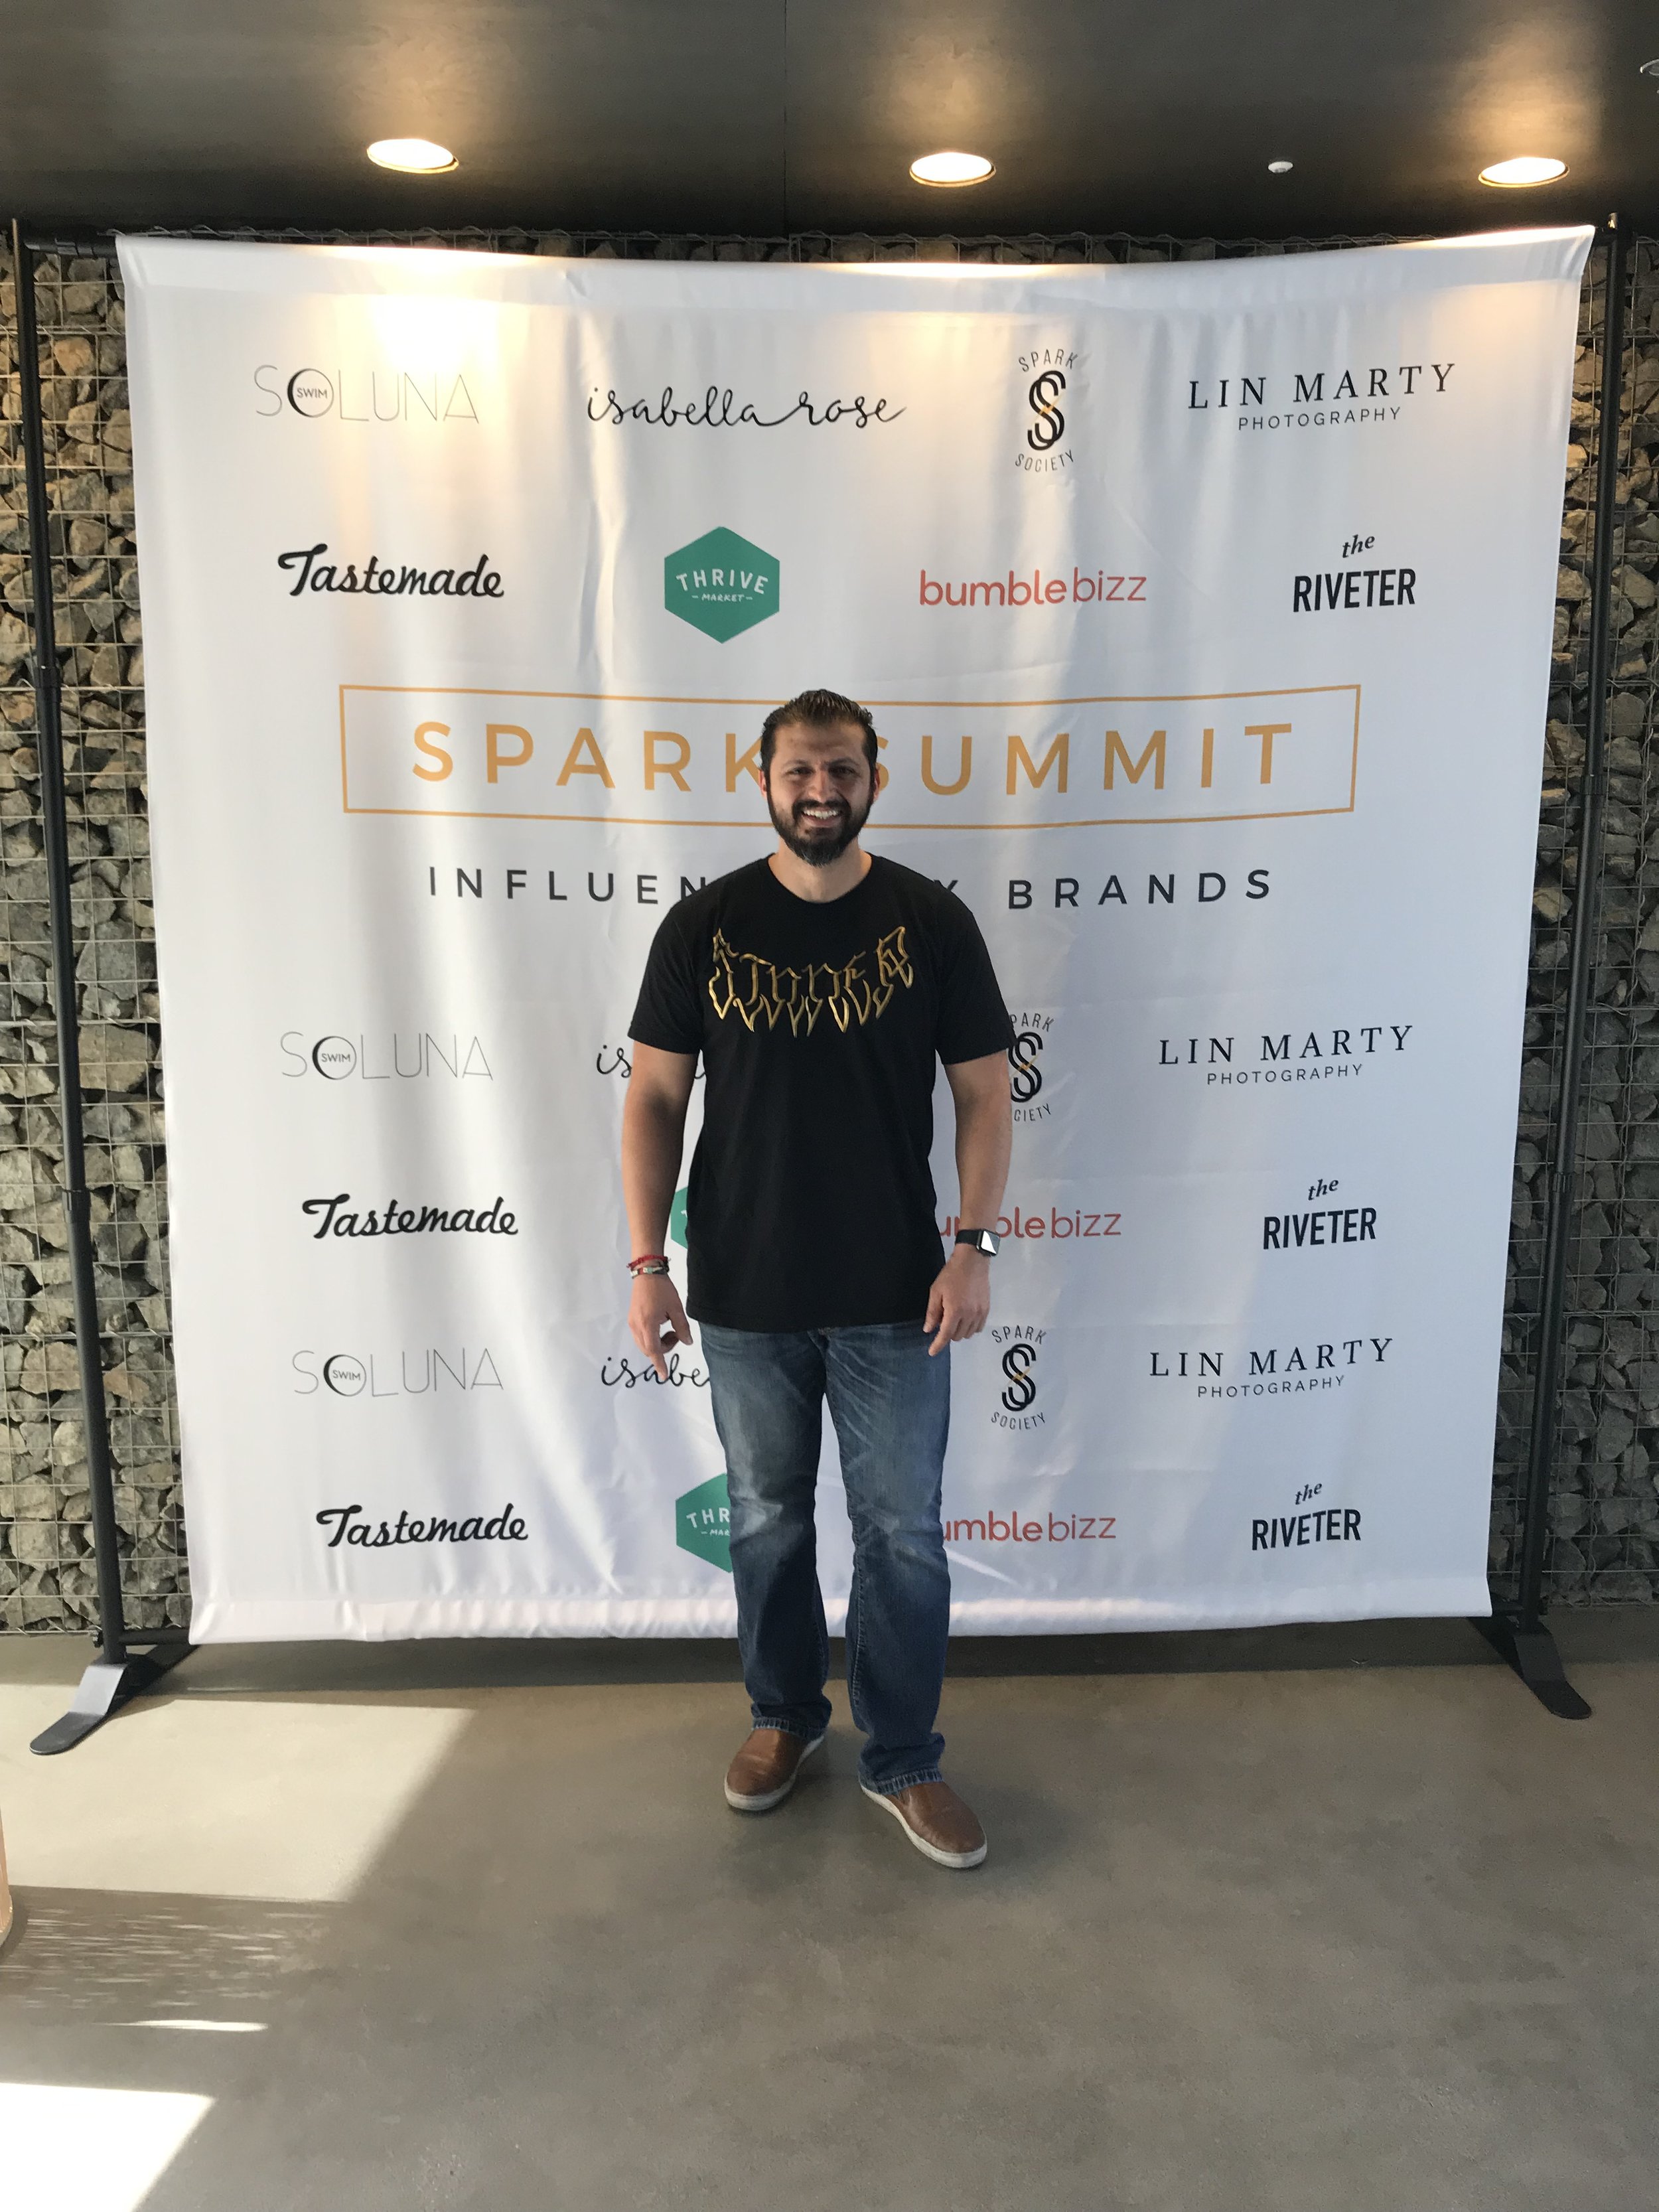 Me at the Spark Summit backdrop